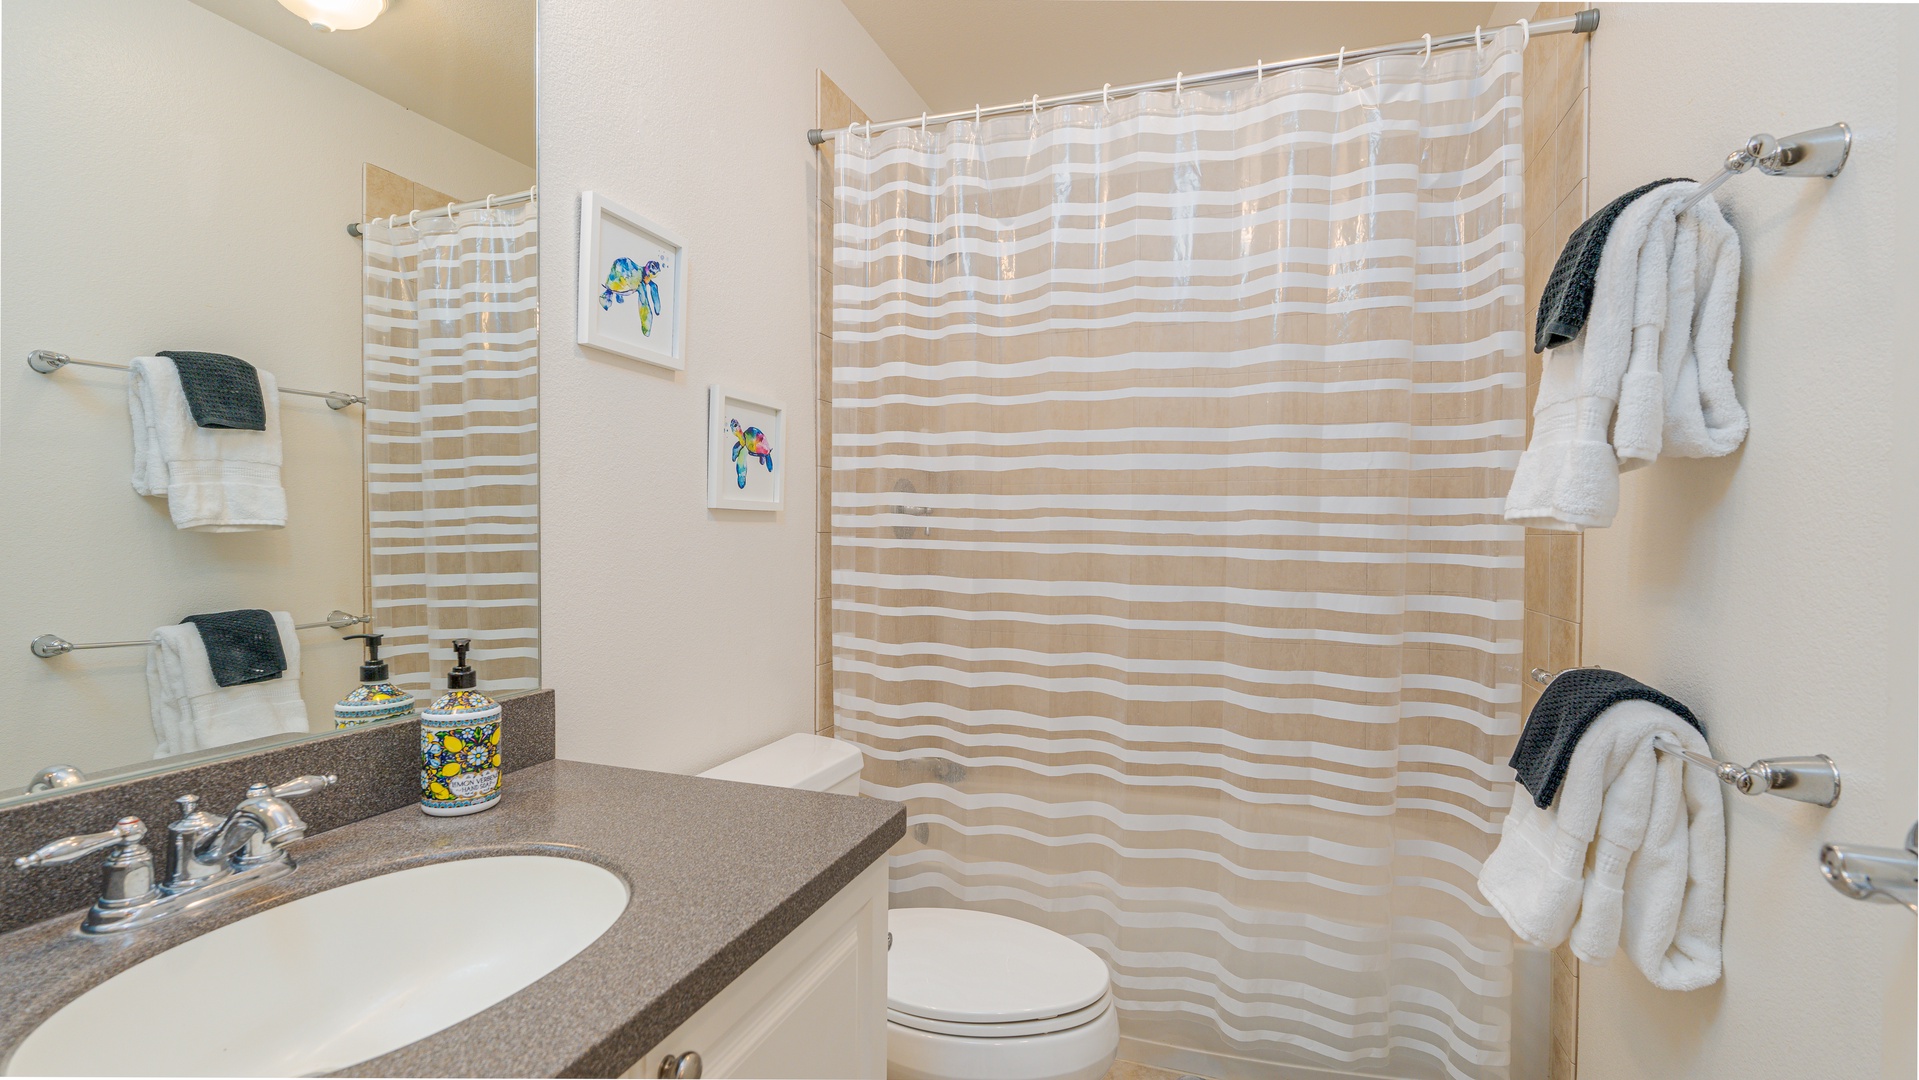 Kapolei Vacation Rentals, Hillside Villas 1496-2 - The second guest bathroom with vanity and shower.